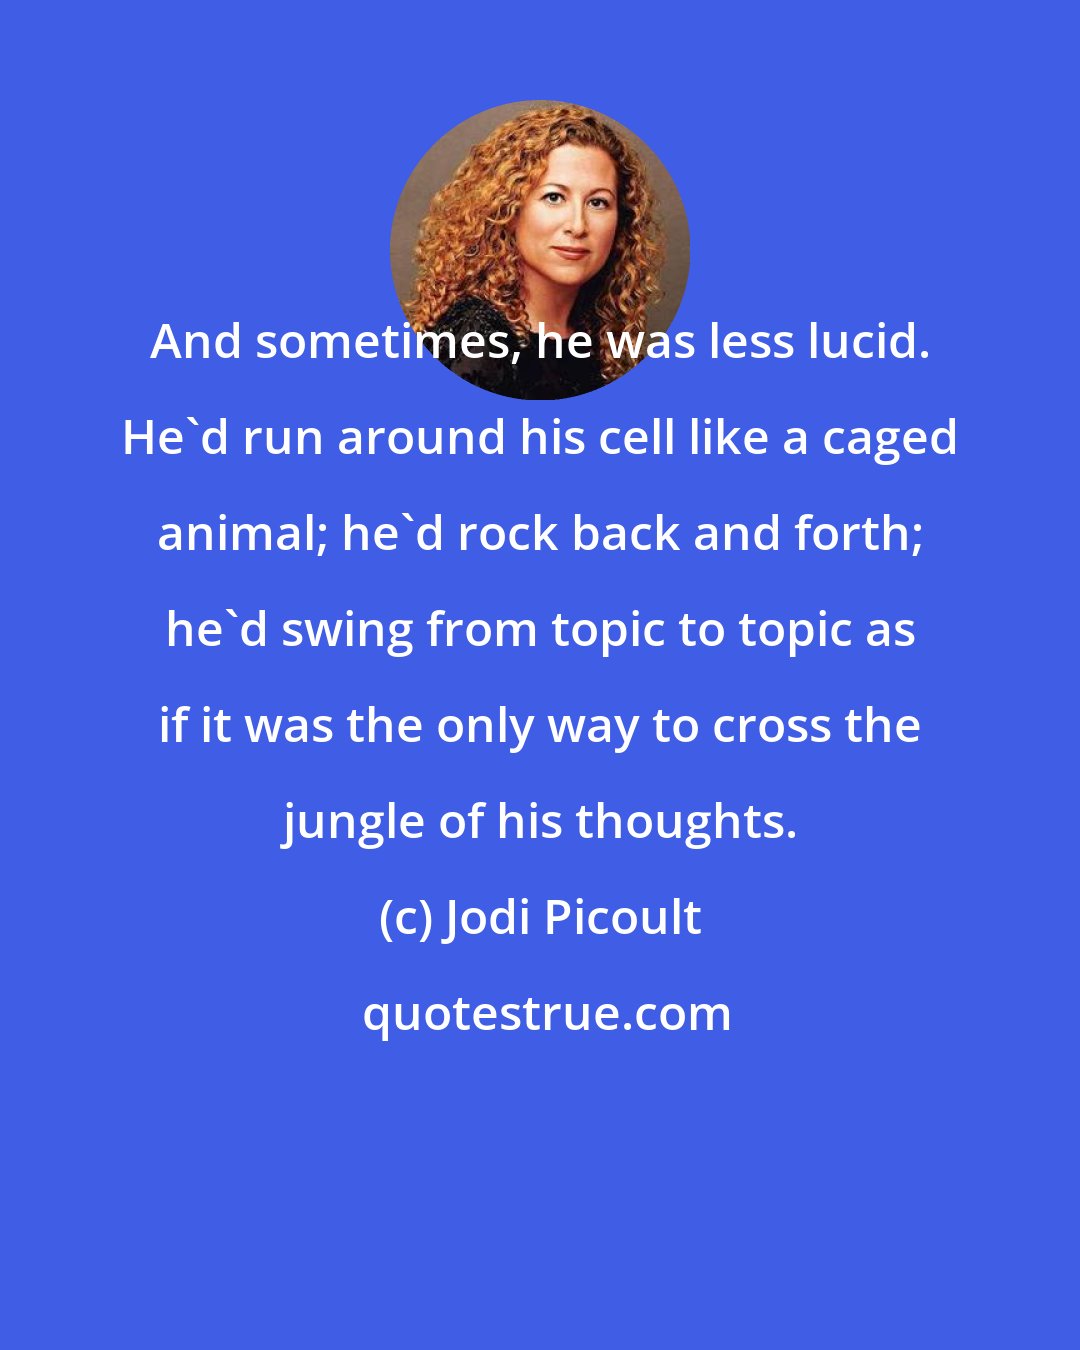 Jodi Picoult: And sometimes, he was less lucid. He'd run around his cell like a caged animal; he'd rock back and forth; he'd swing from topic to topic as if it was the only way to cross the jungle of his thoughts.